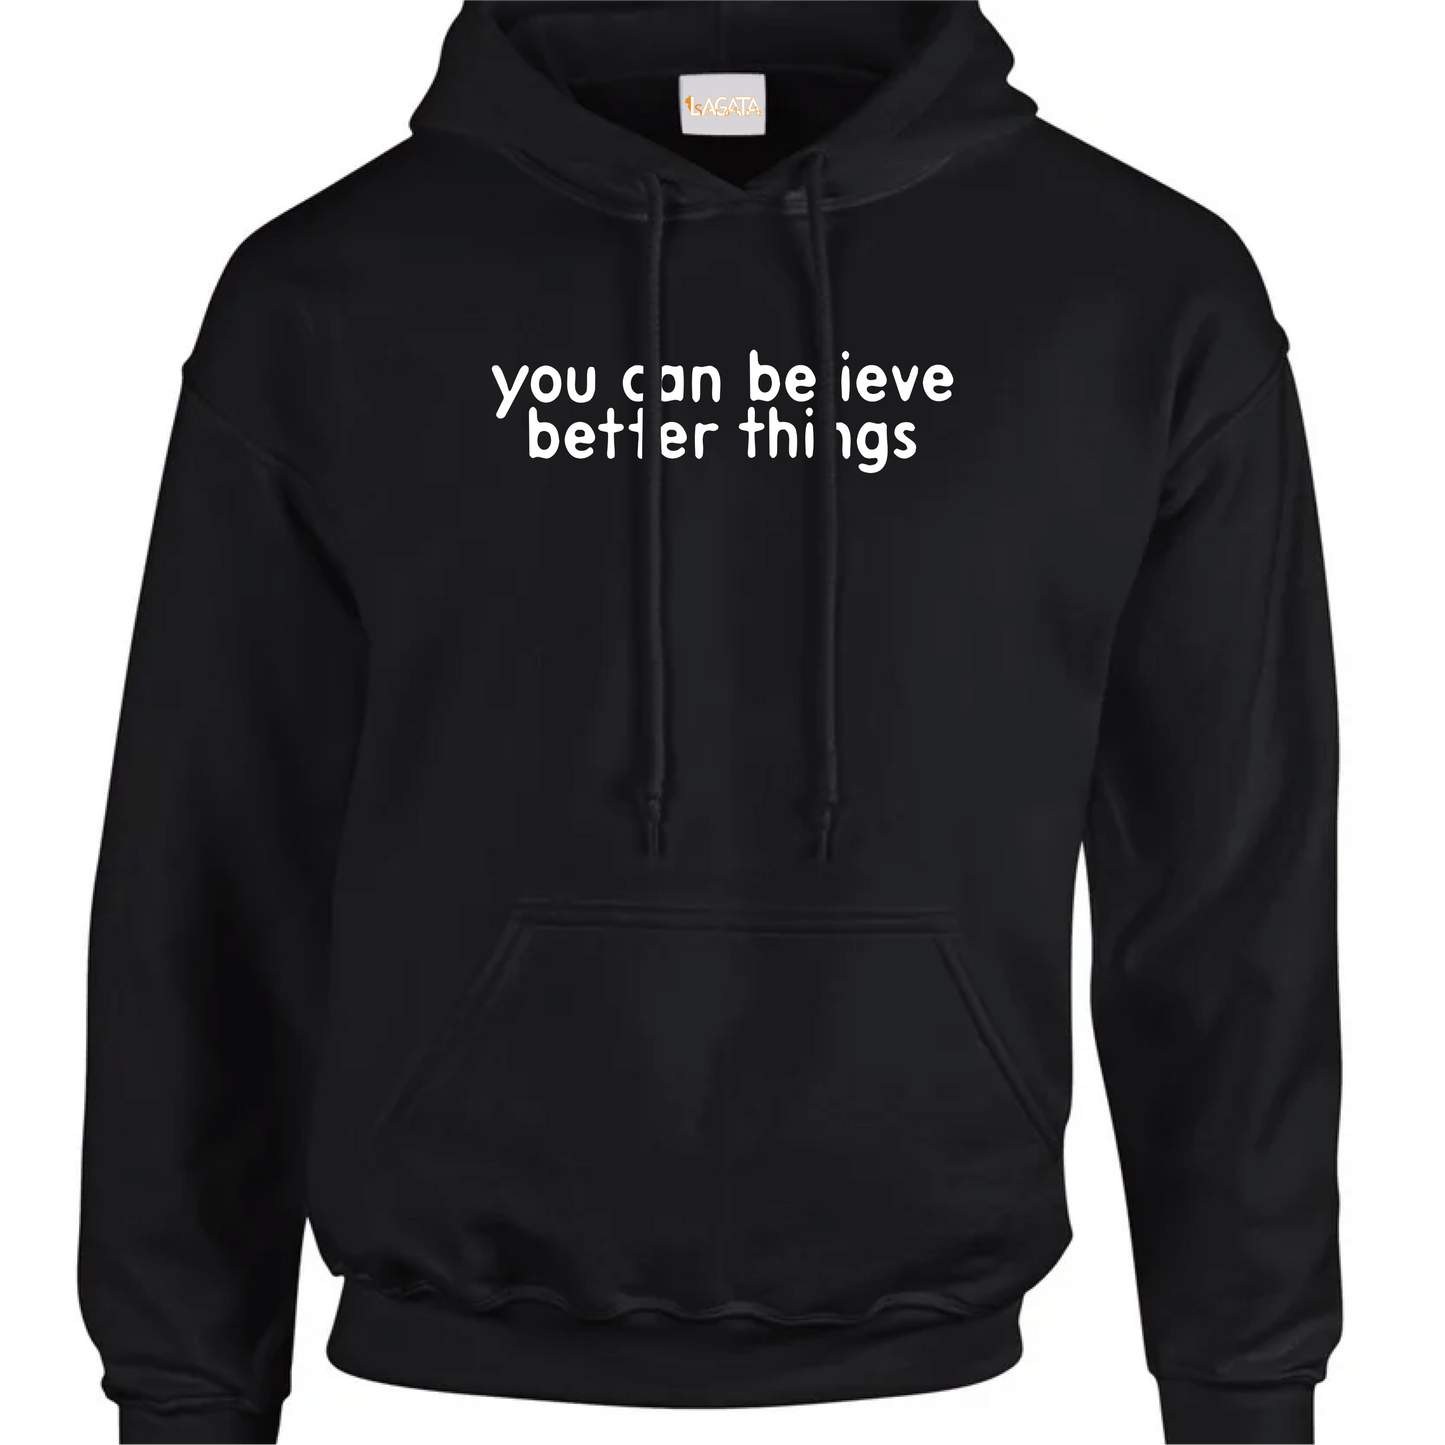 YOU CAN BELIEVE BETTER (PRINTED) THINGS